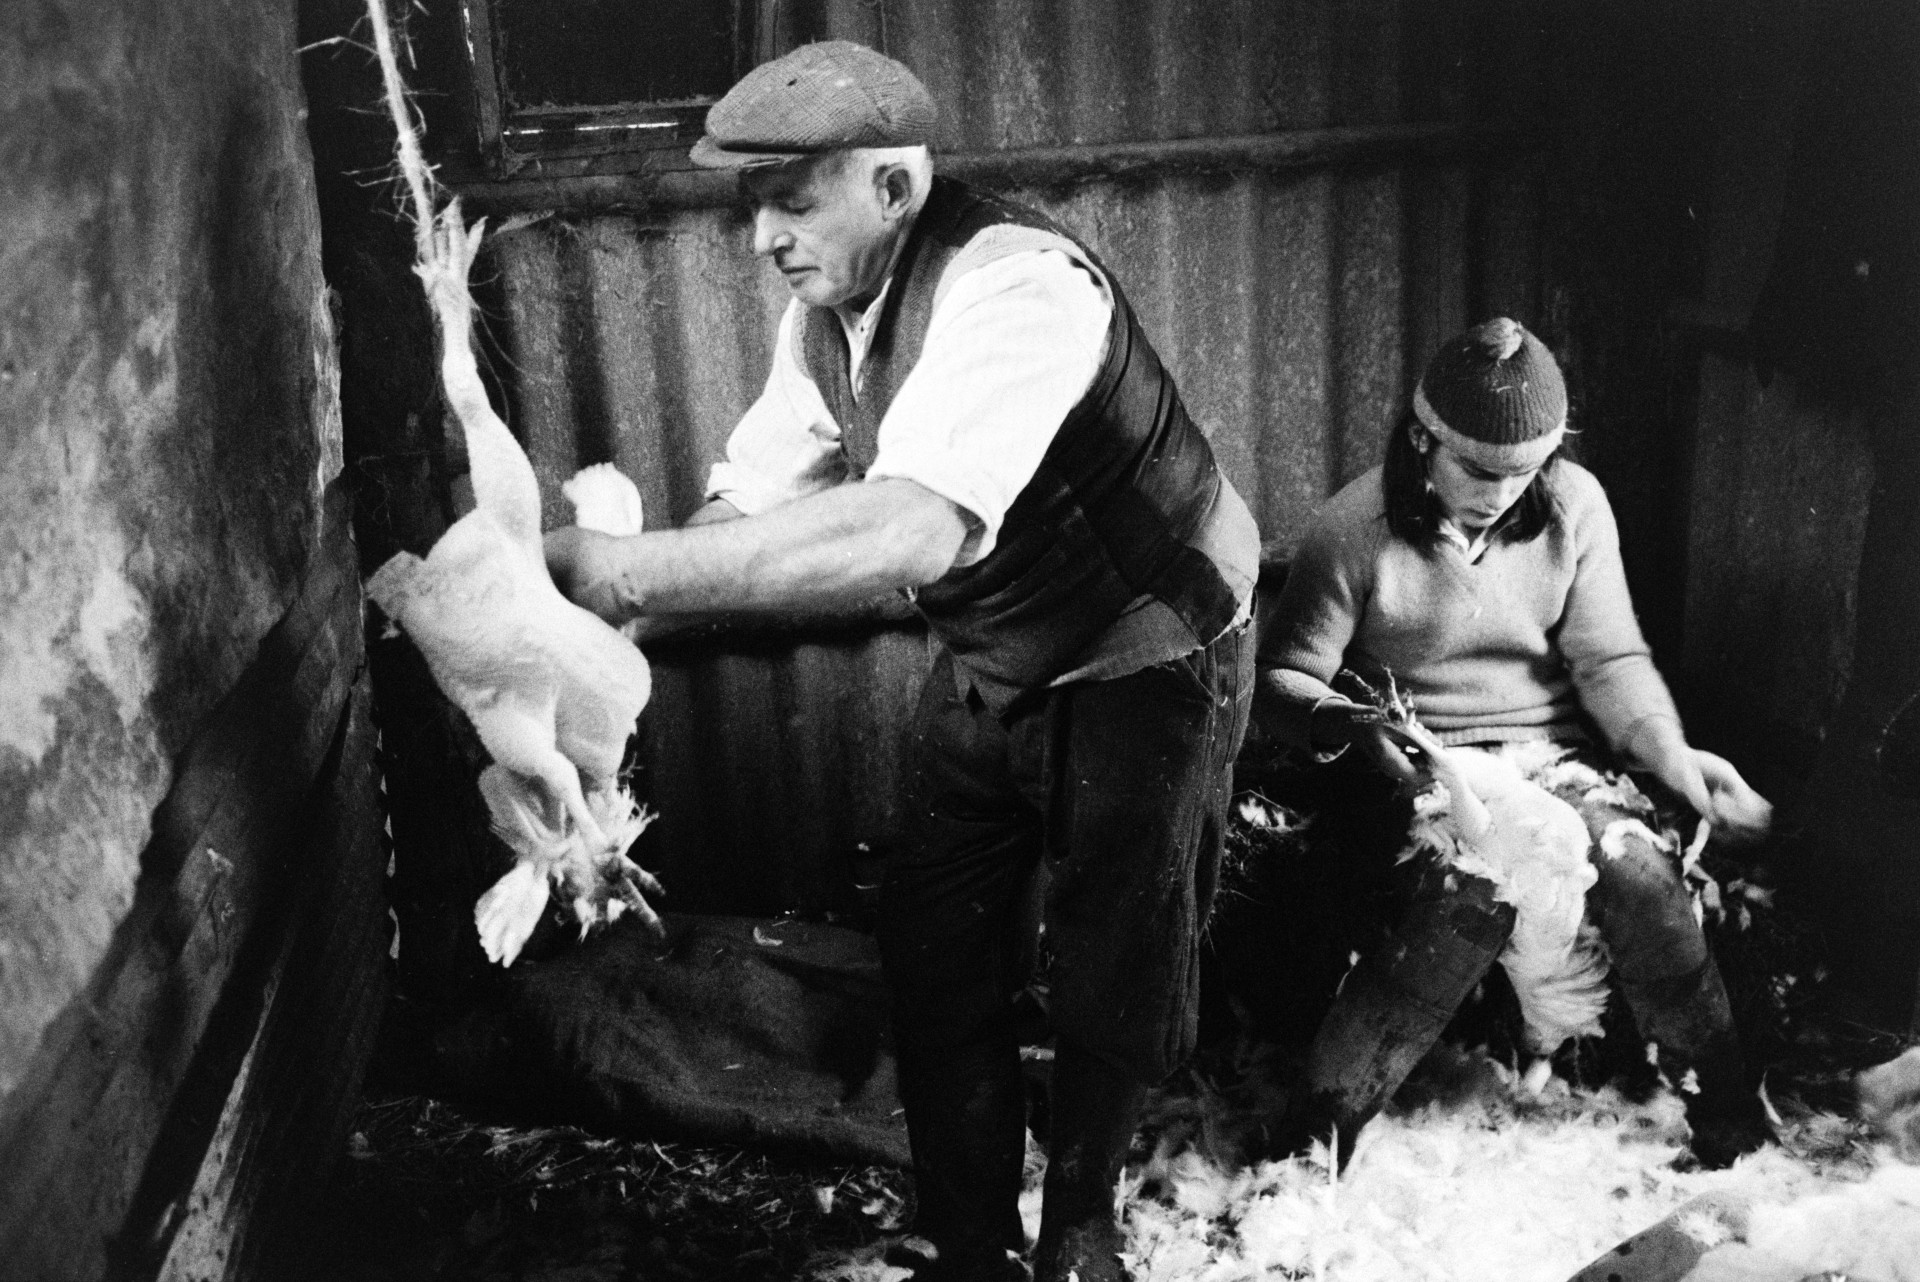 Derek Bright, sat down, and Tom Hooper plucking chickens for Christmas, in a shed at Mill Road Farm, Beaford. The farm was also known as Jeffrys.